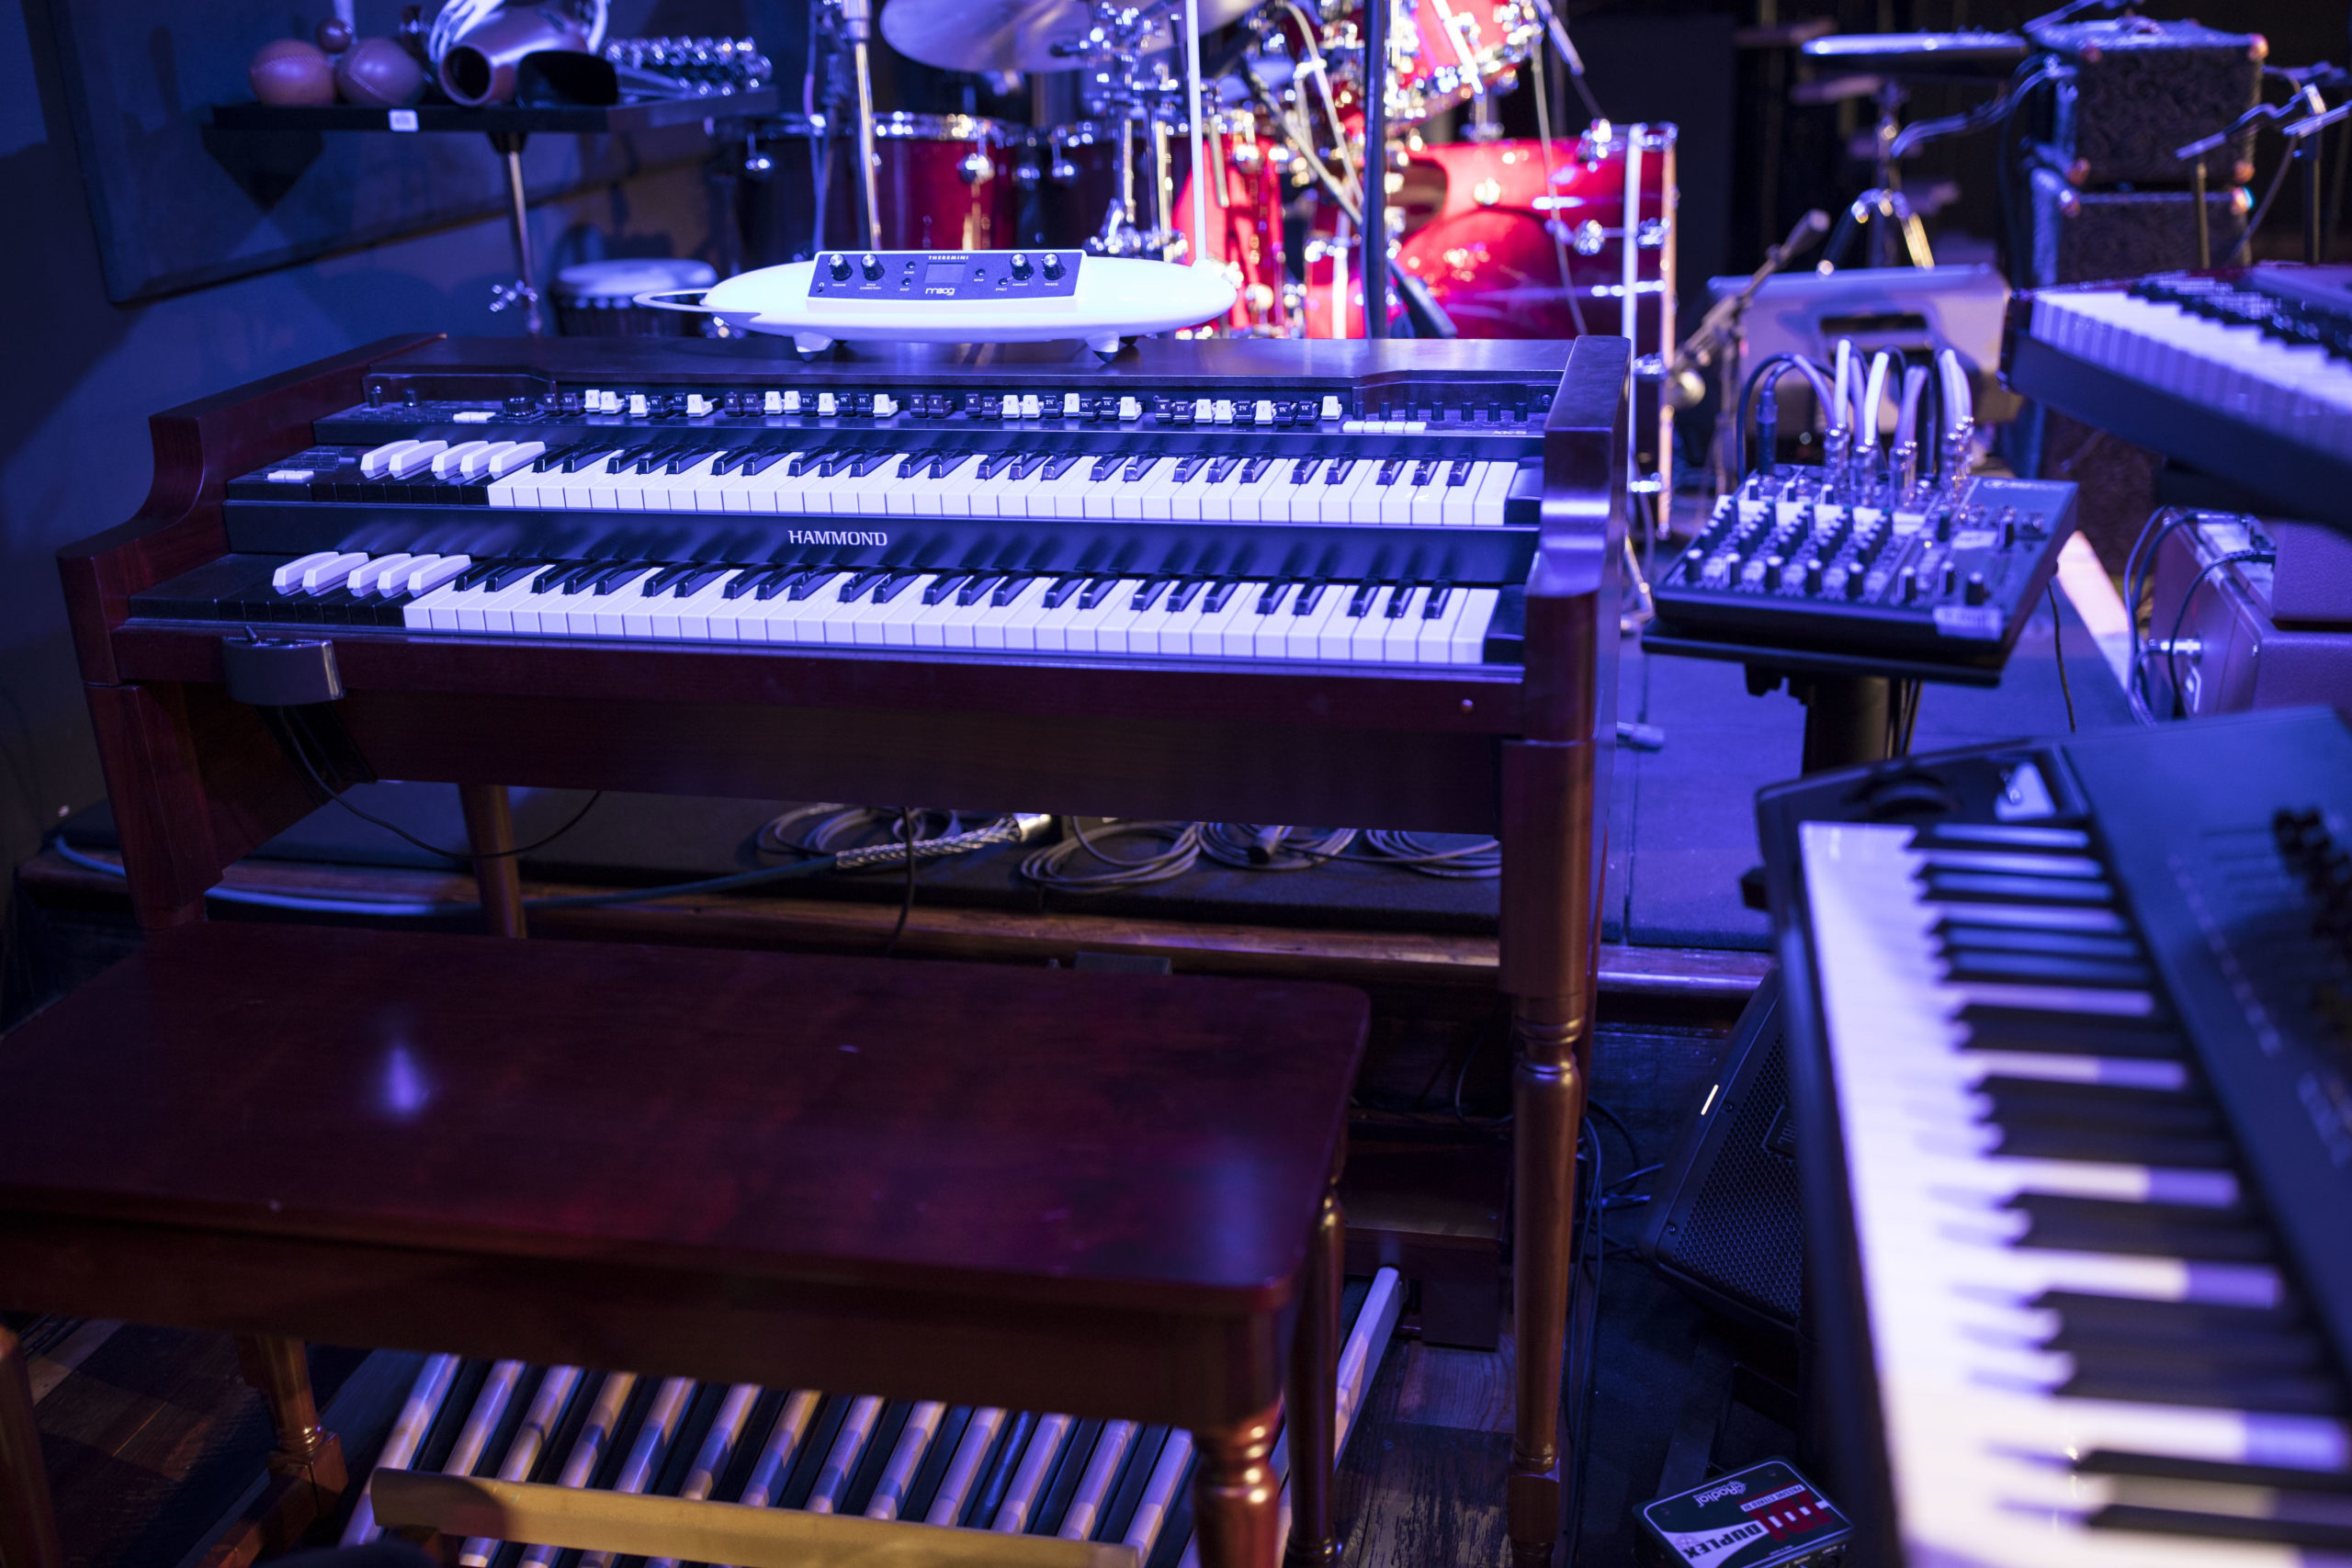 keyboards, live music event, piano, instruments